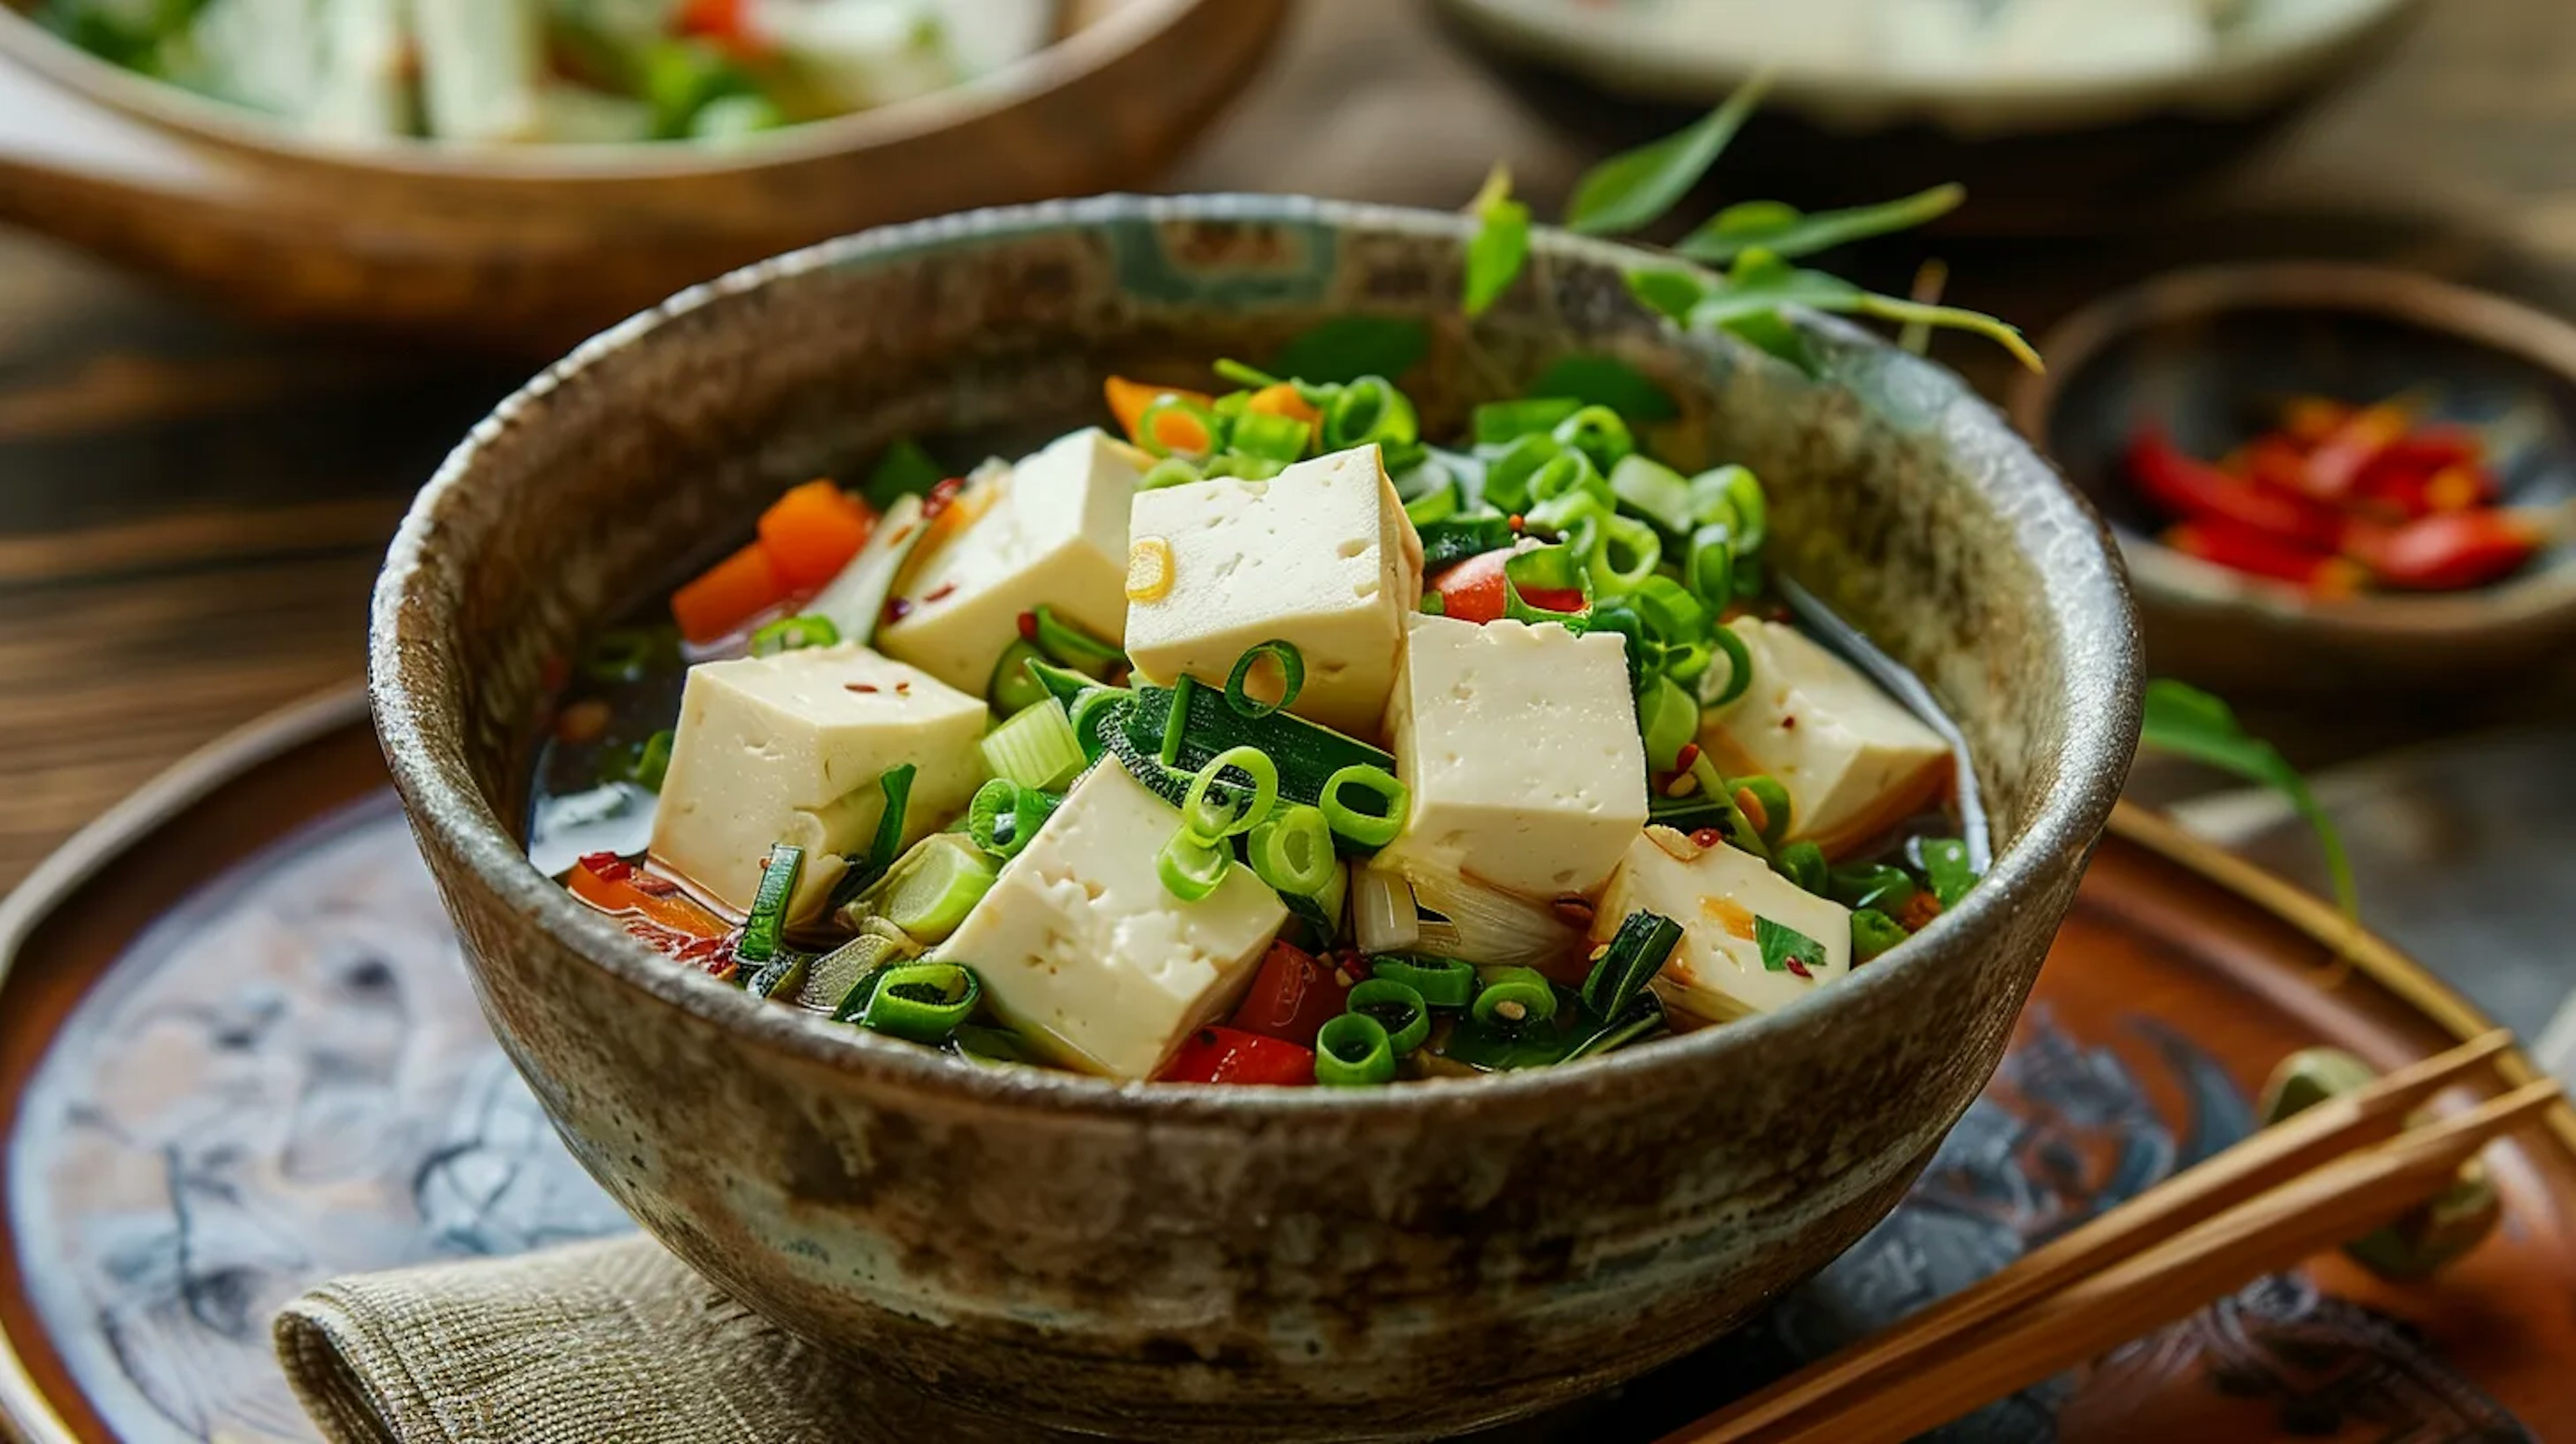 A healthy and visually appealing tofu dish, richly garnished with vibrant vegetables and grains, served on an elegant ceramic plate, emphasizing the health benefits of tofu